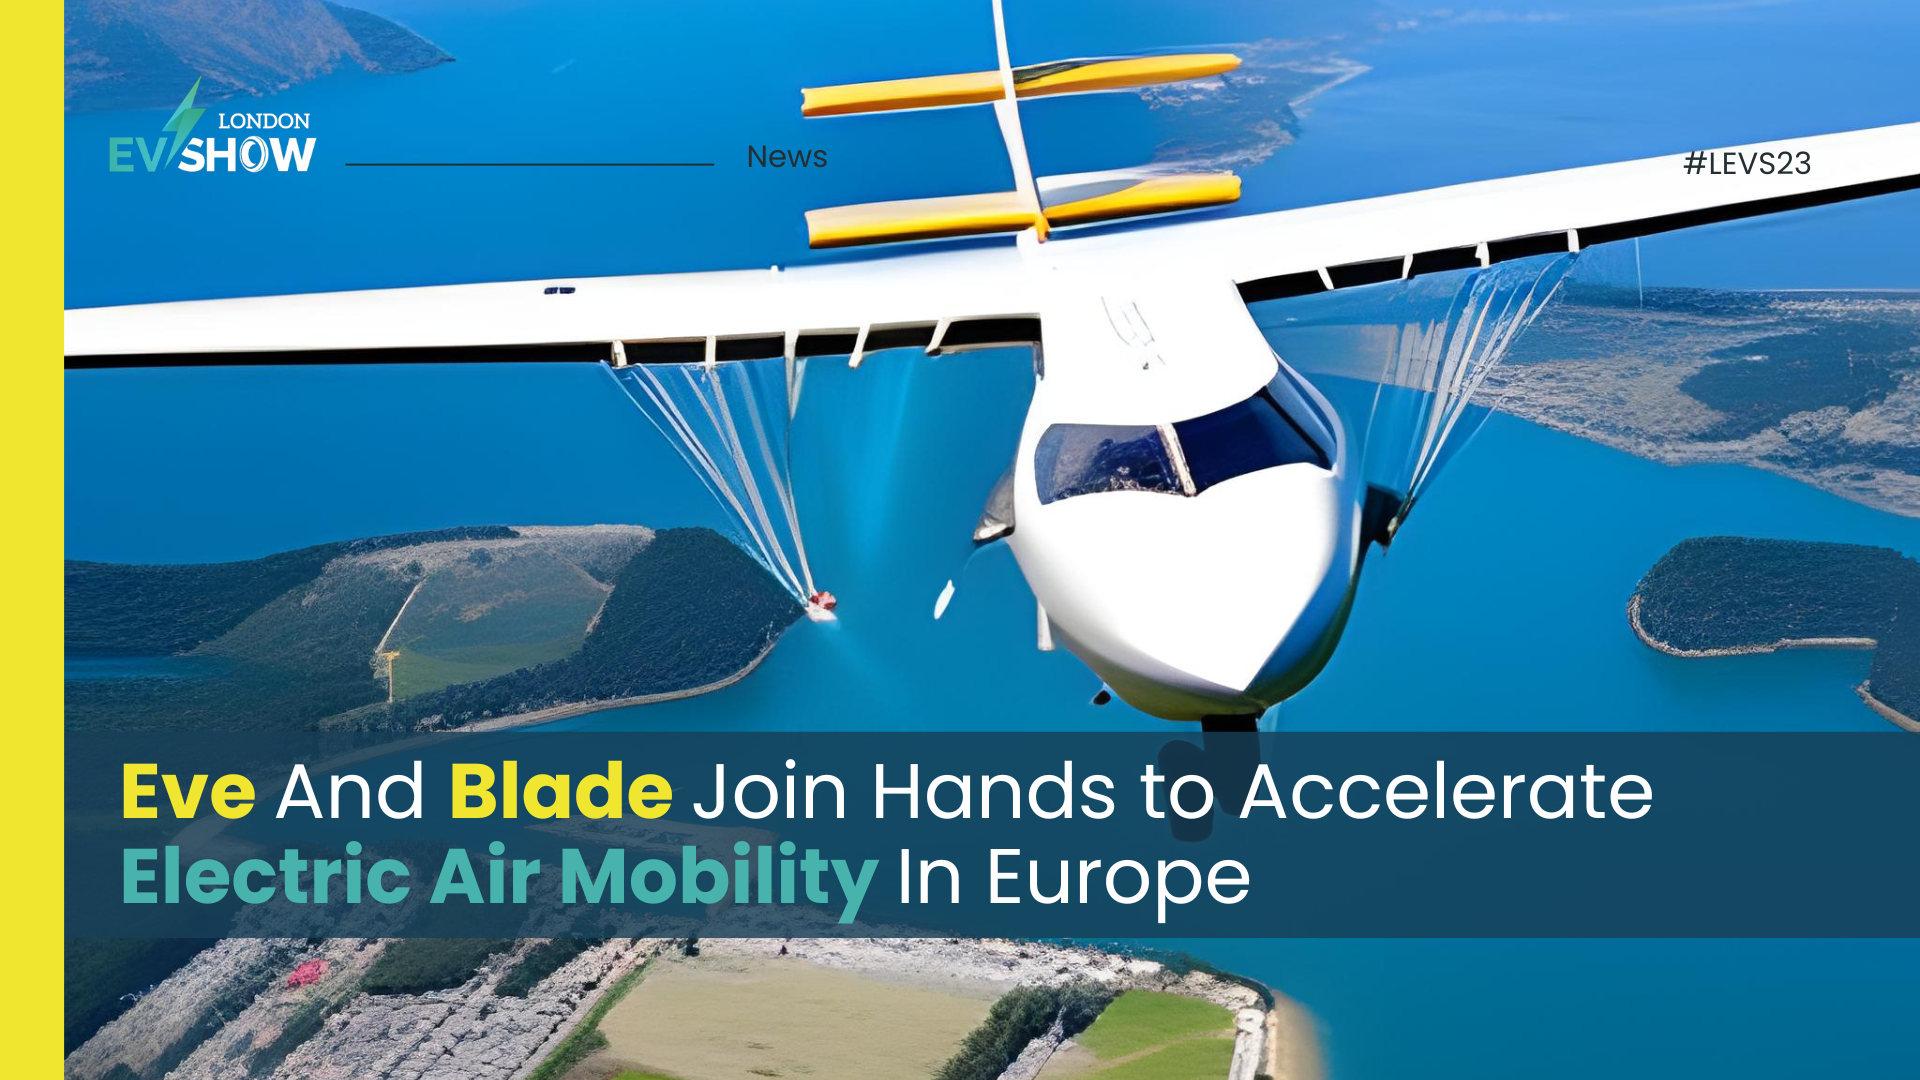 Eve And Blade Join Hands to Accelerate Electric Air Mobility In Europe